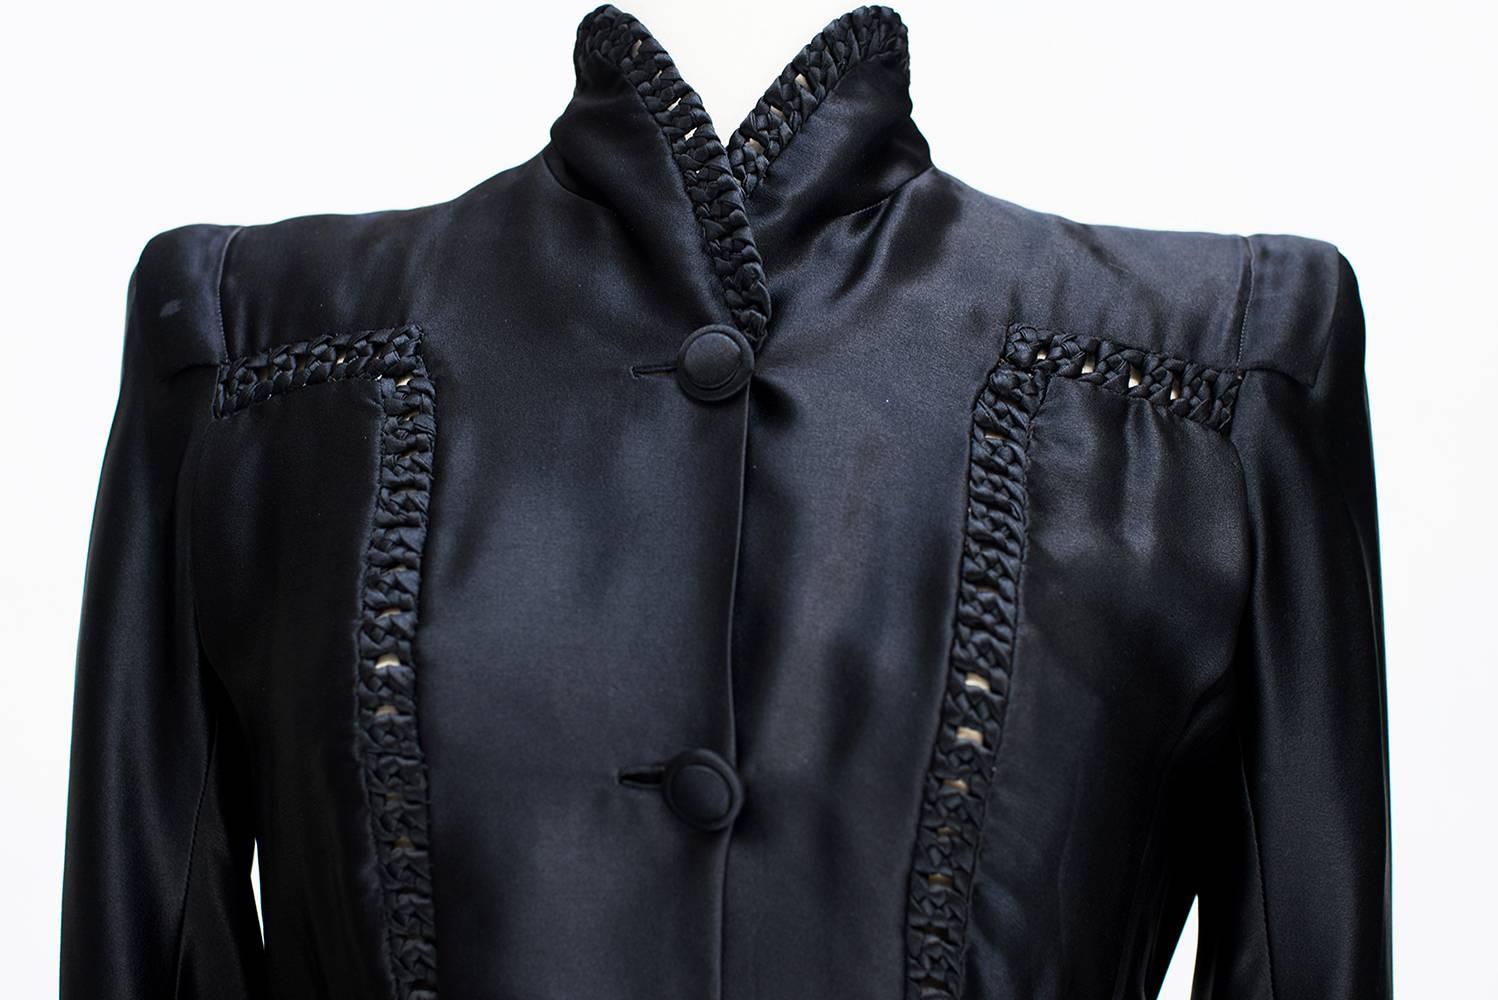 1935s Nina Ricci Haute -Couture Gorgeous Black Satin Jacket  :
Rarissime; . The straight jacket long sleeves, and two pockets, is closed by a thin belt whose buckle is bakelite. The lead and the back of the jacket are underlined by silk satin